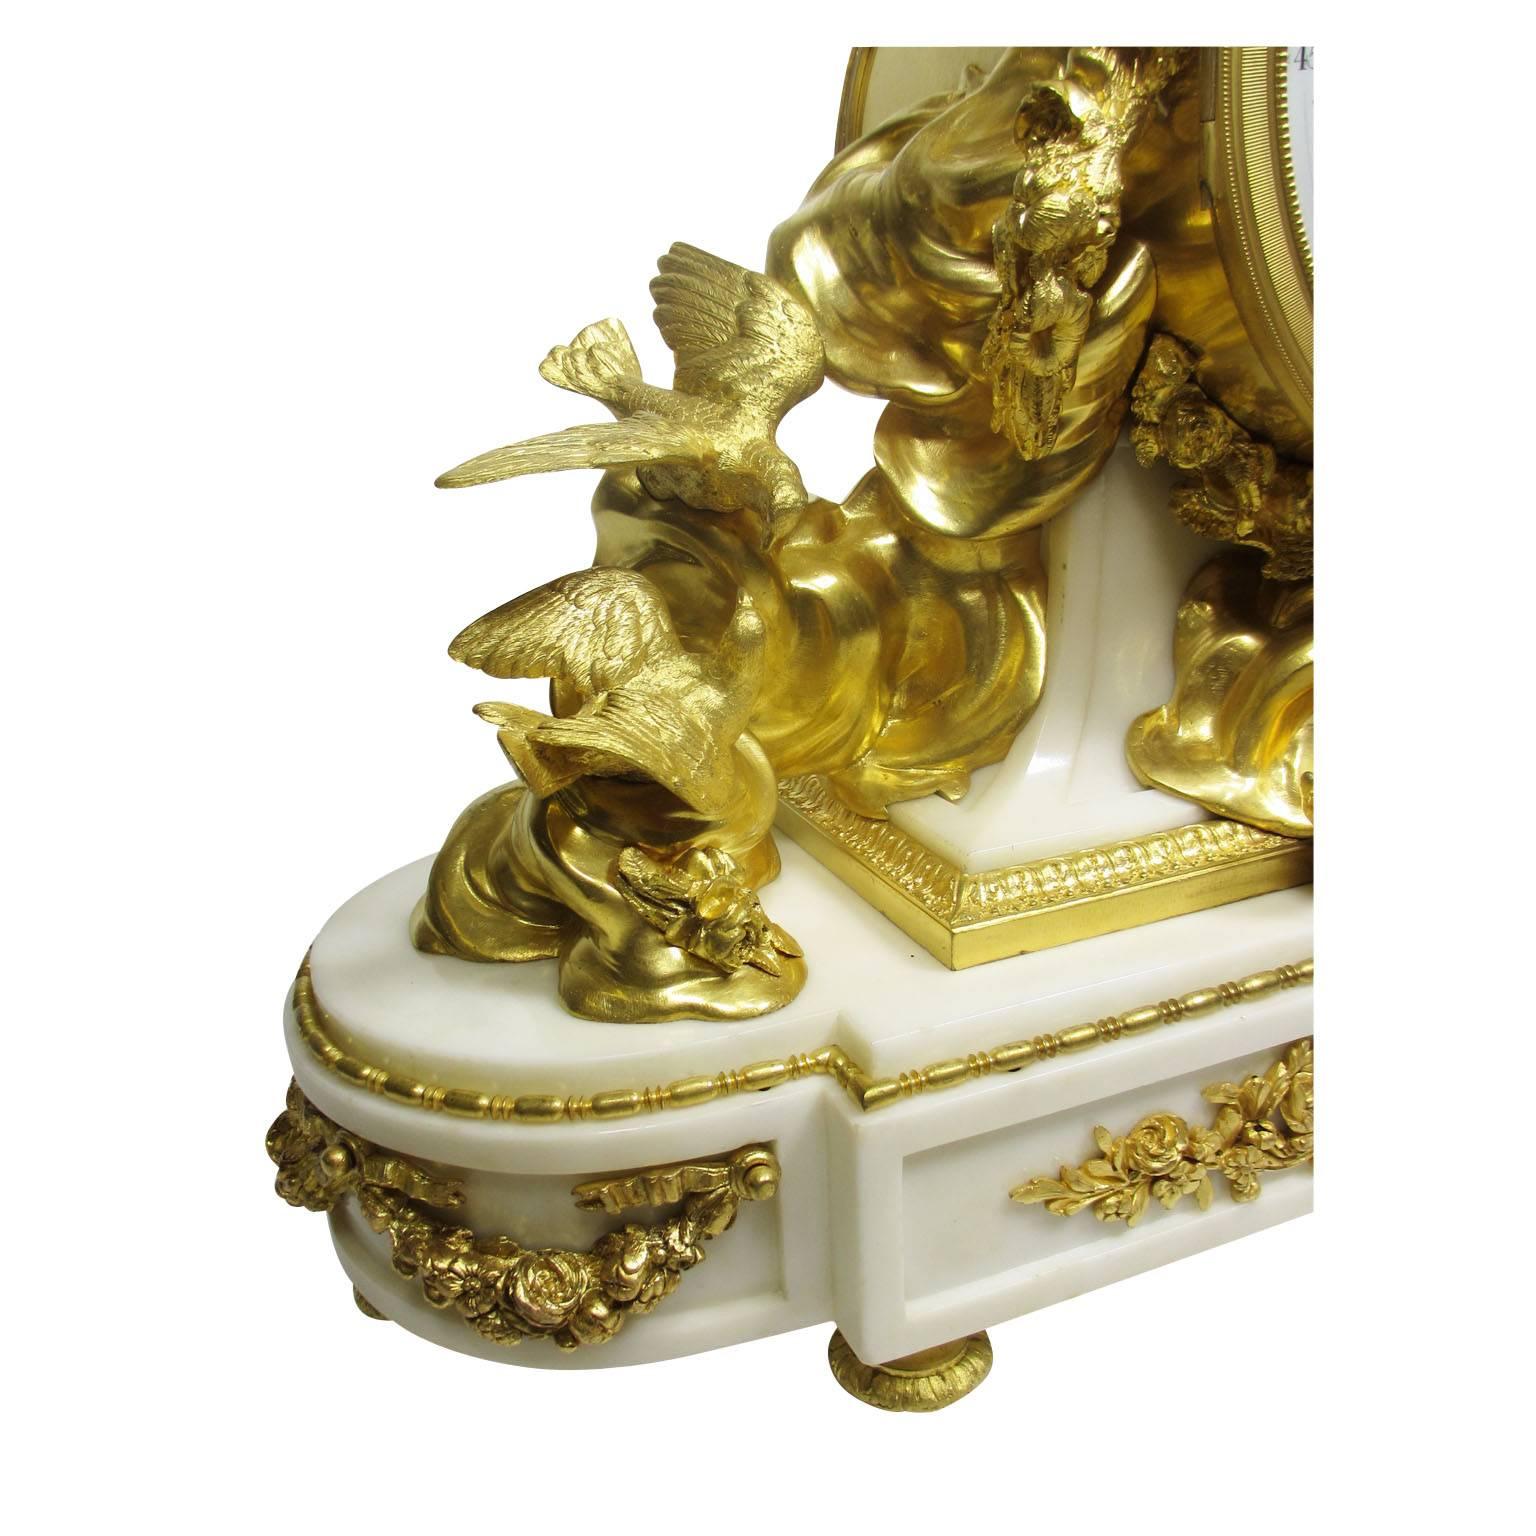 Late 19th Century Louis XV Style 19th-20th Century Figural Gilt Bronze White Marble Mantel Clock For Sale